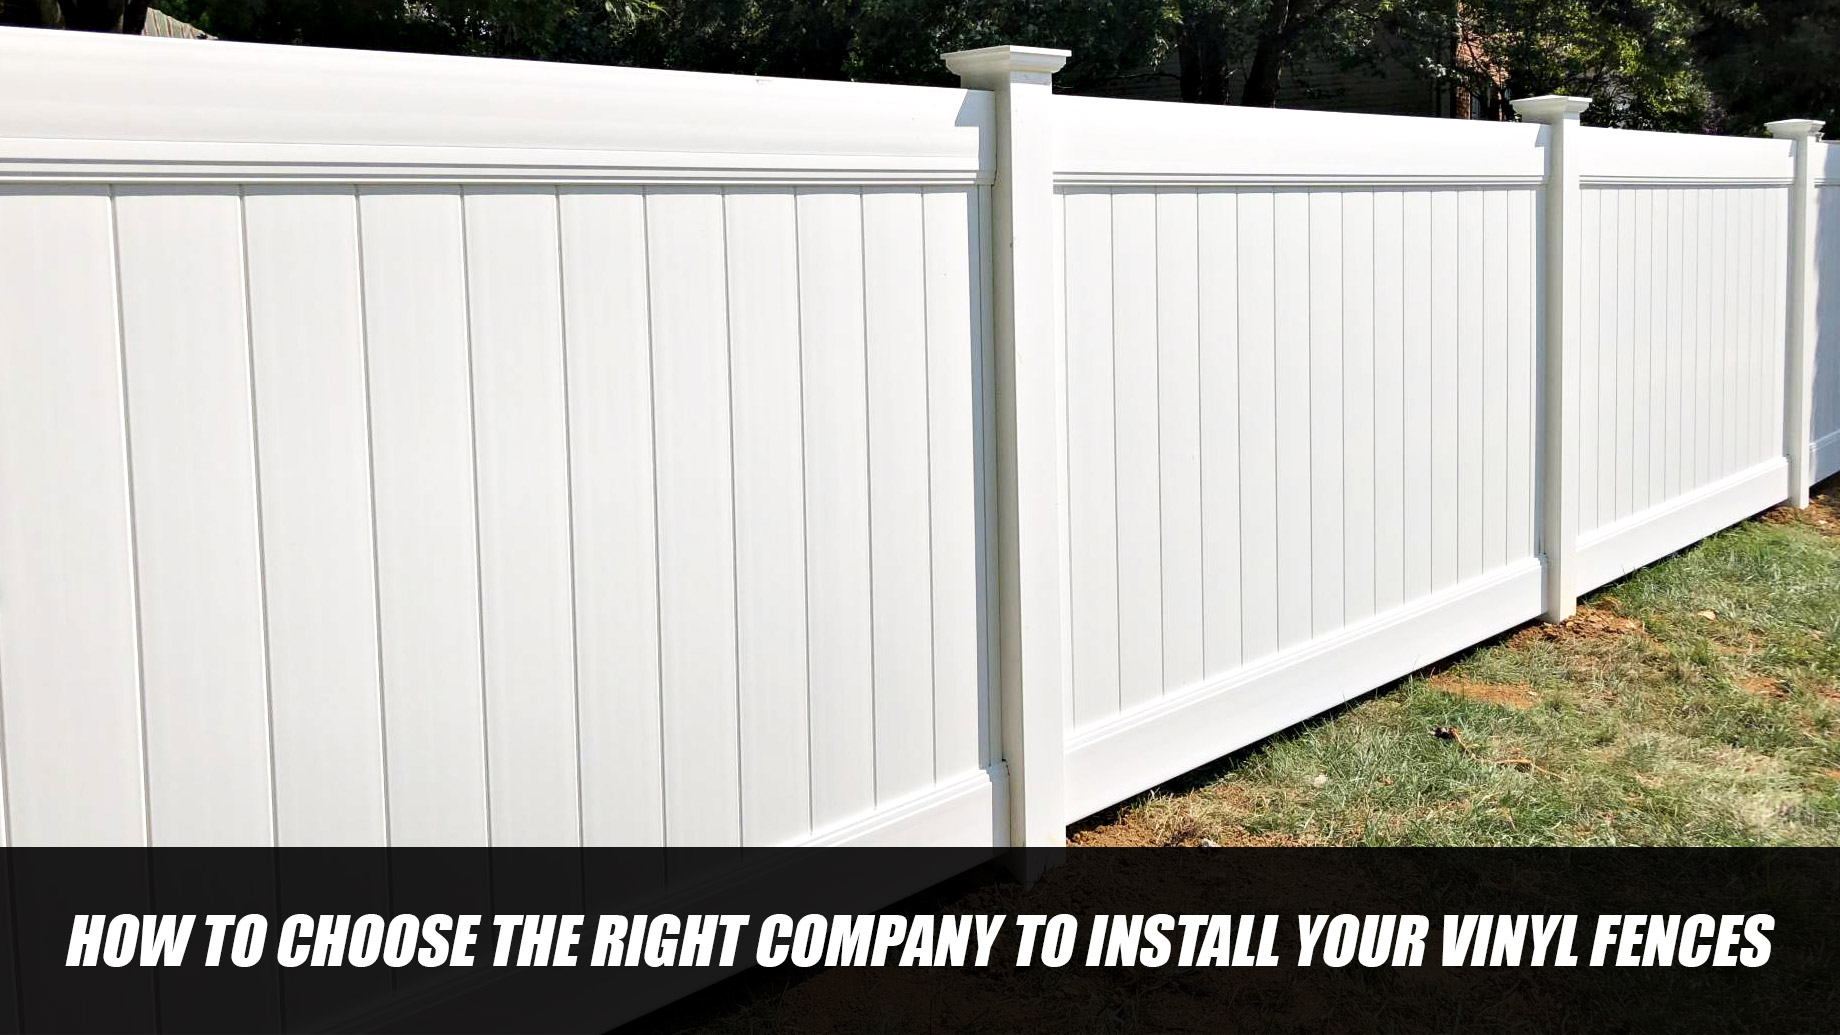 How to Choose the Right Company to Install Your Vinyl Fences